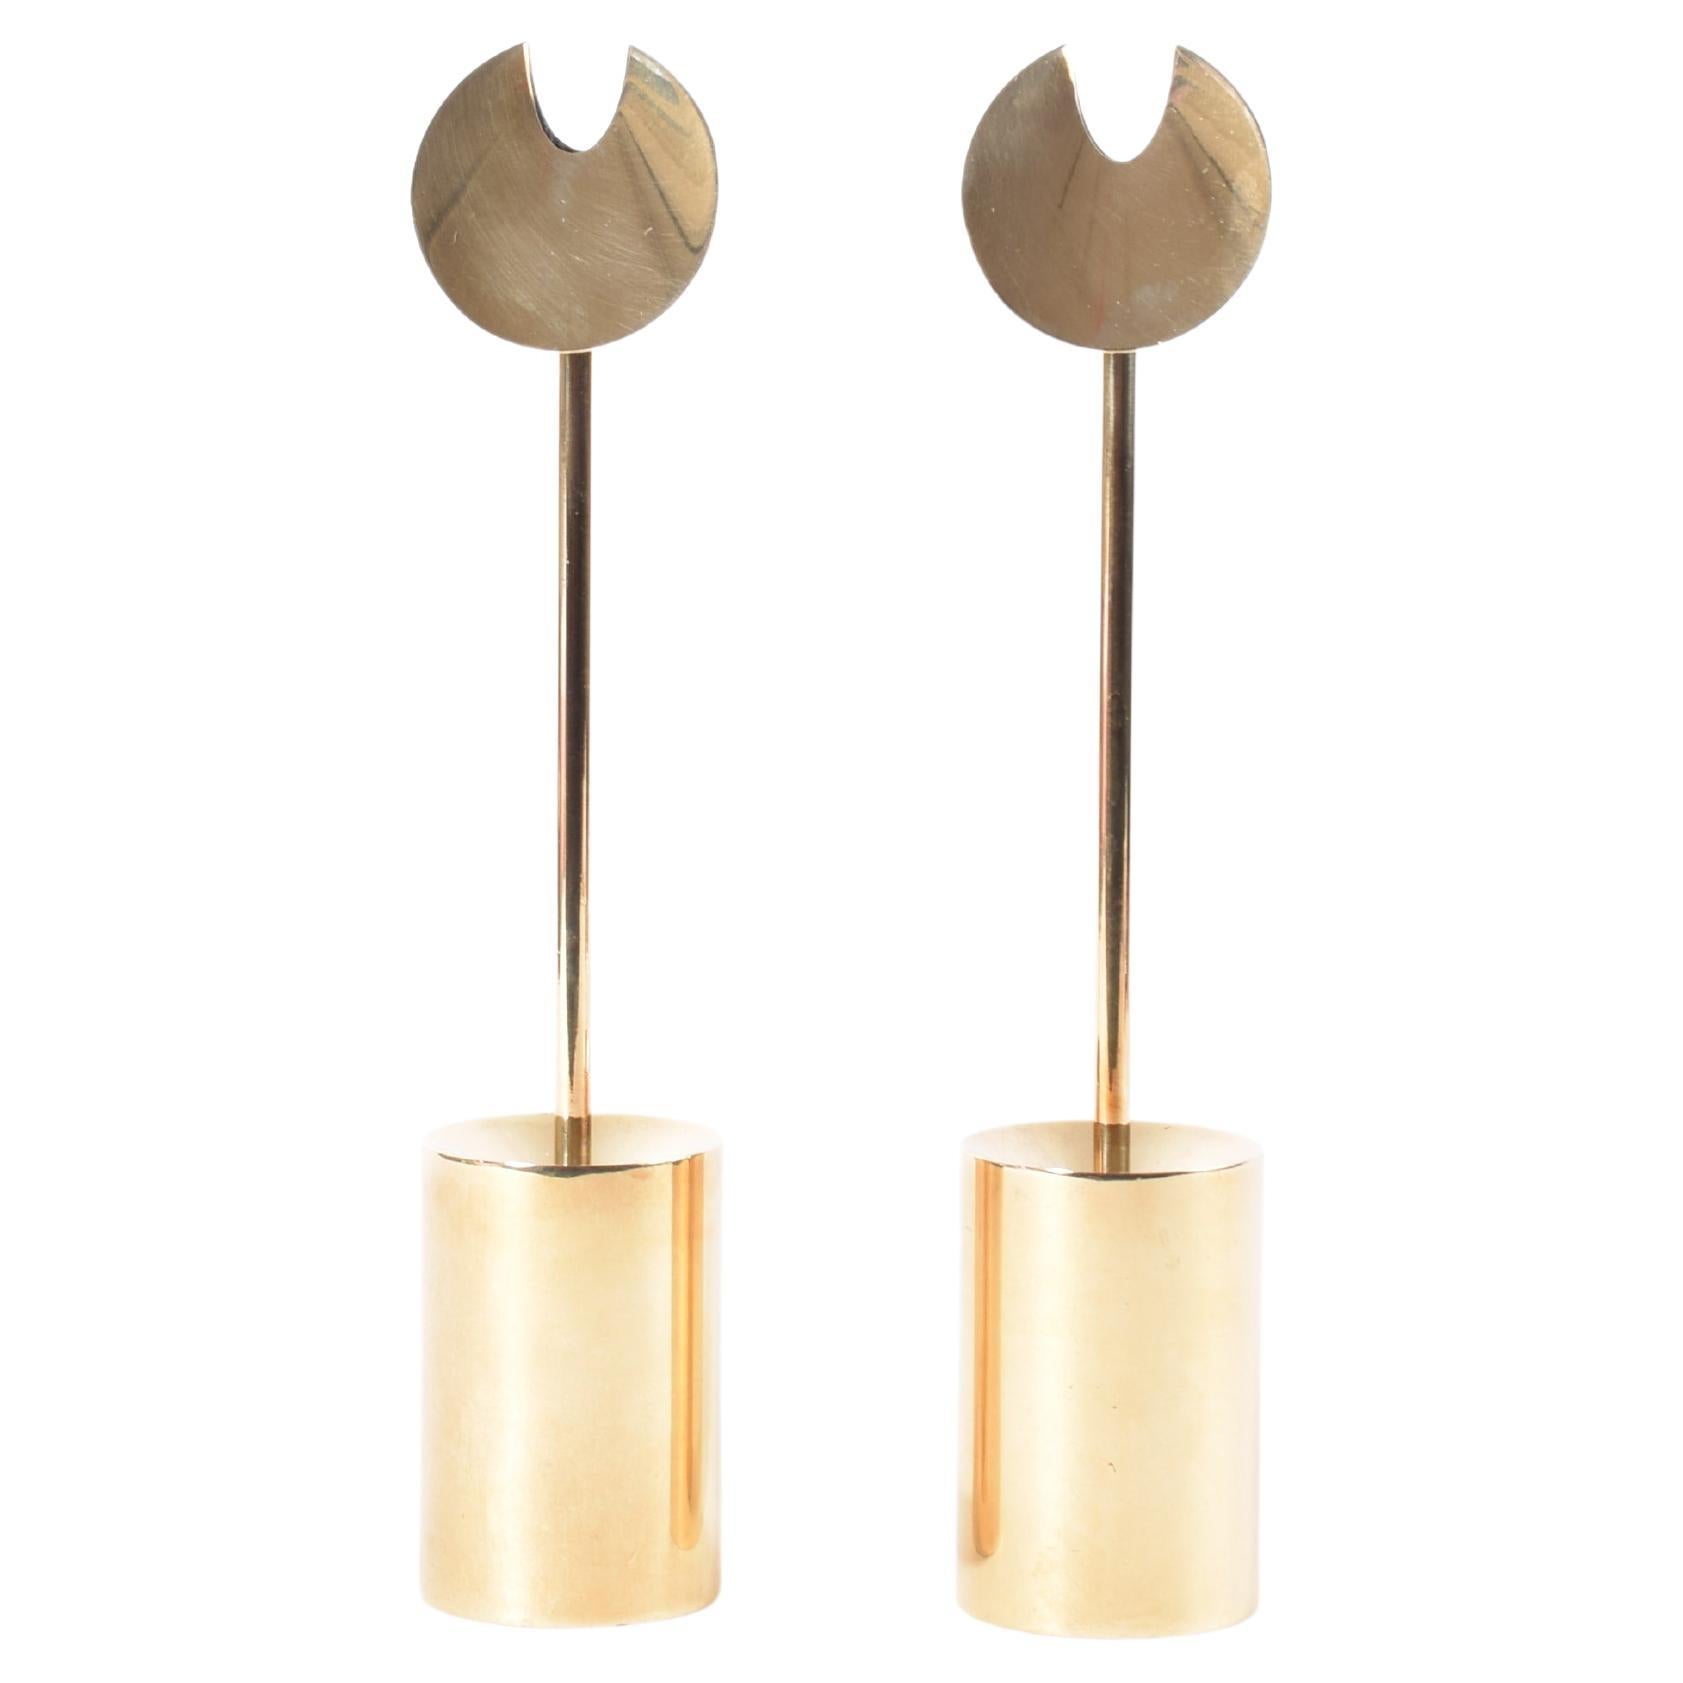 Set of 2 Pierre Forsell Aniara Brass Candlesticks for Skultuna Sweden, 1960s For Sale